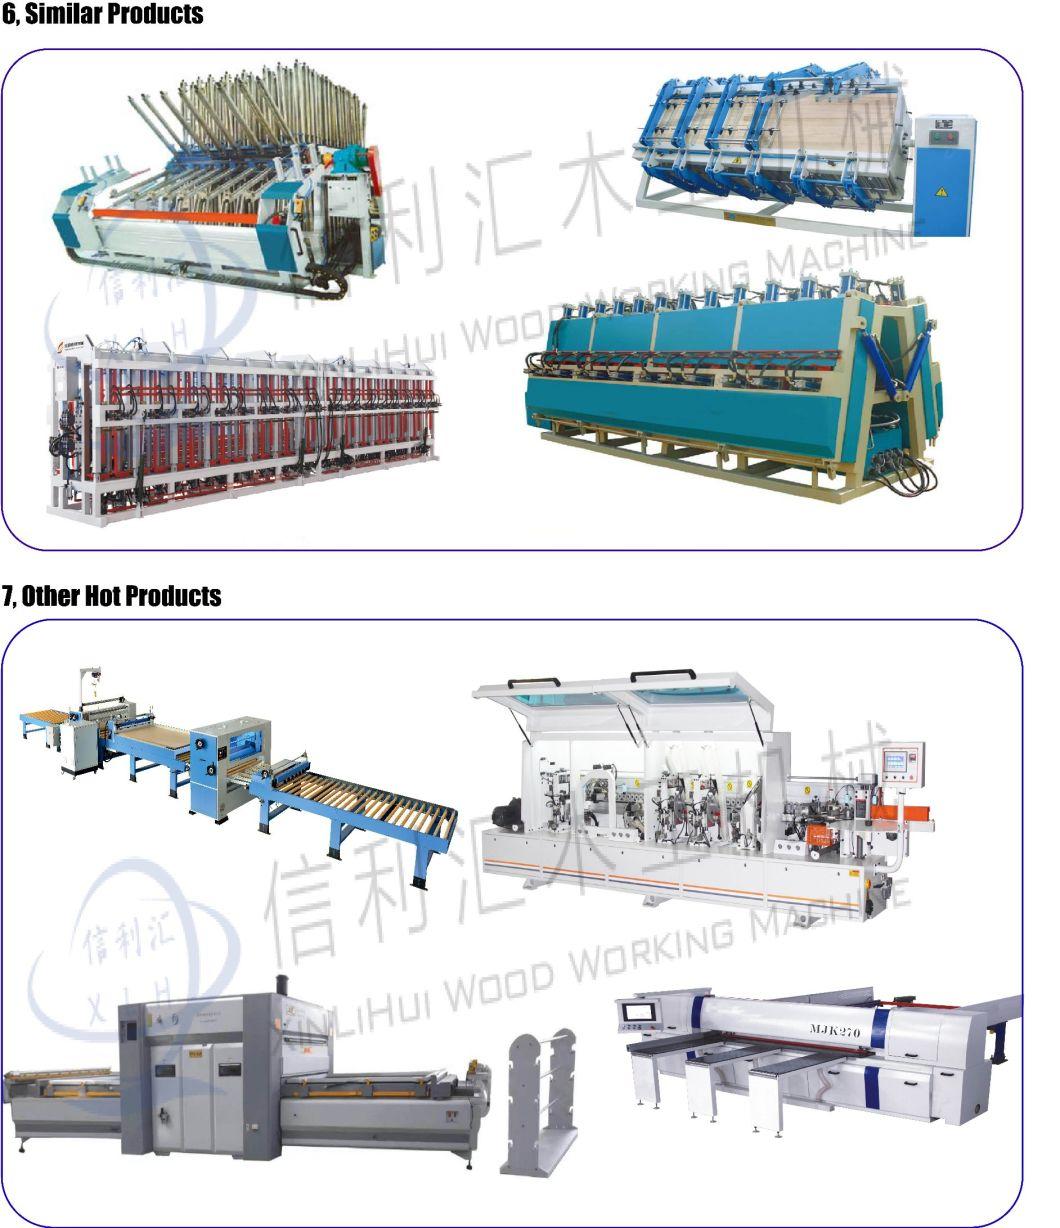 Full-Automatic Edge Gluer Composer/ Wood Board Jointing Machine Board Joint Machine with Slope Workbench/ Wood Processing Machine